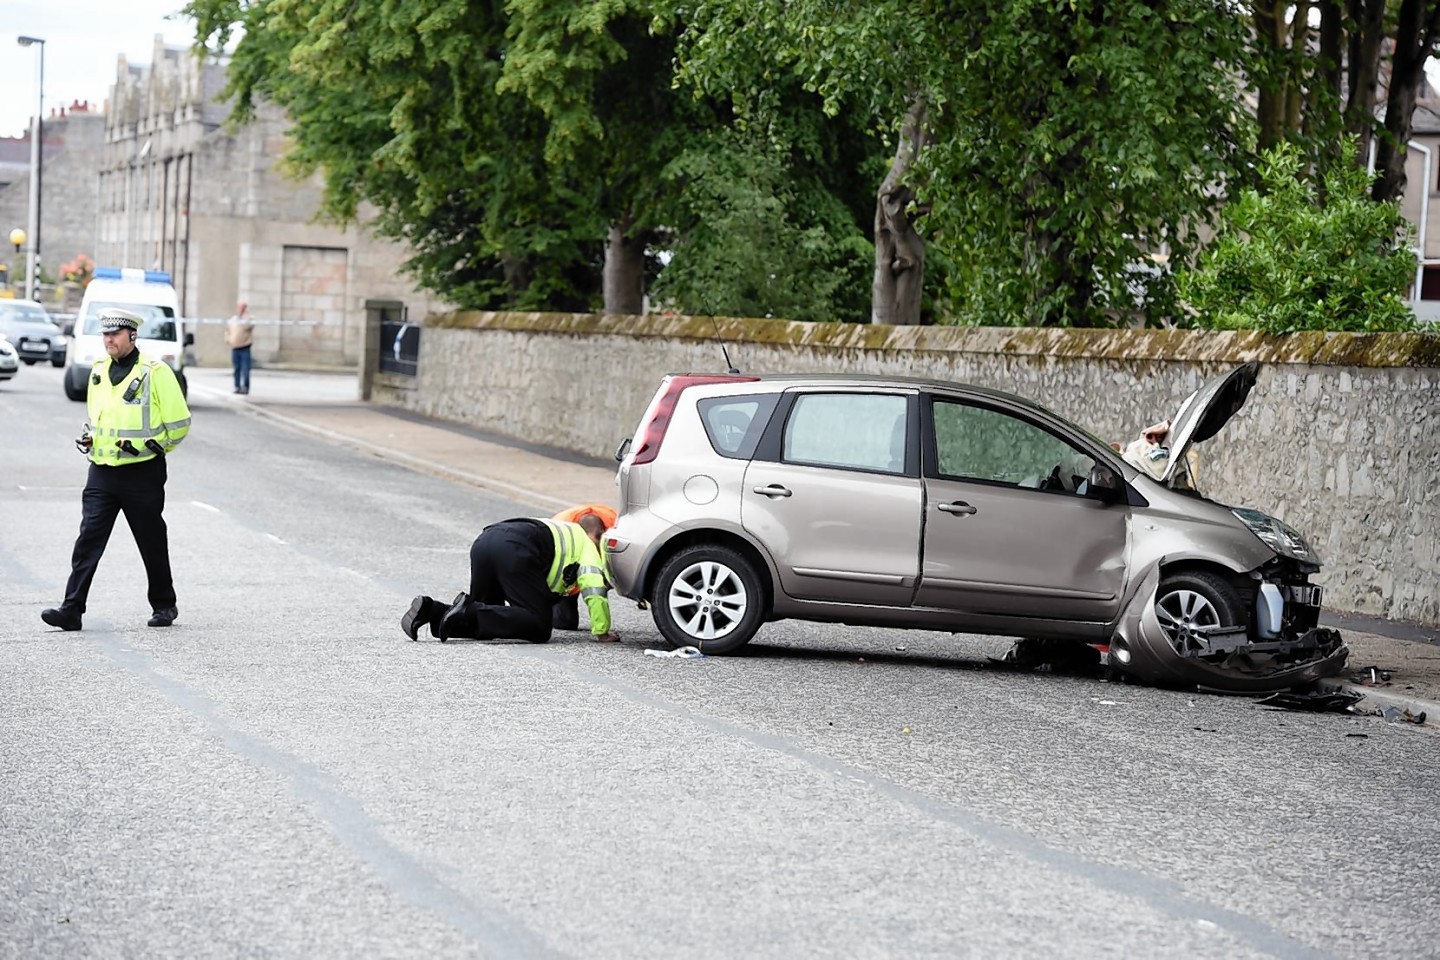 An RTC on Harlaw Road, Inverurie. Picture by JIM IRVINE    26-7-15